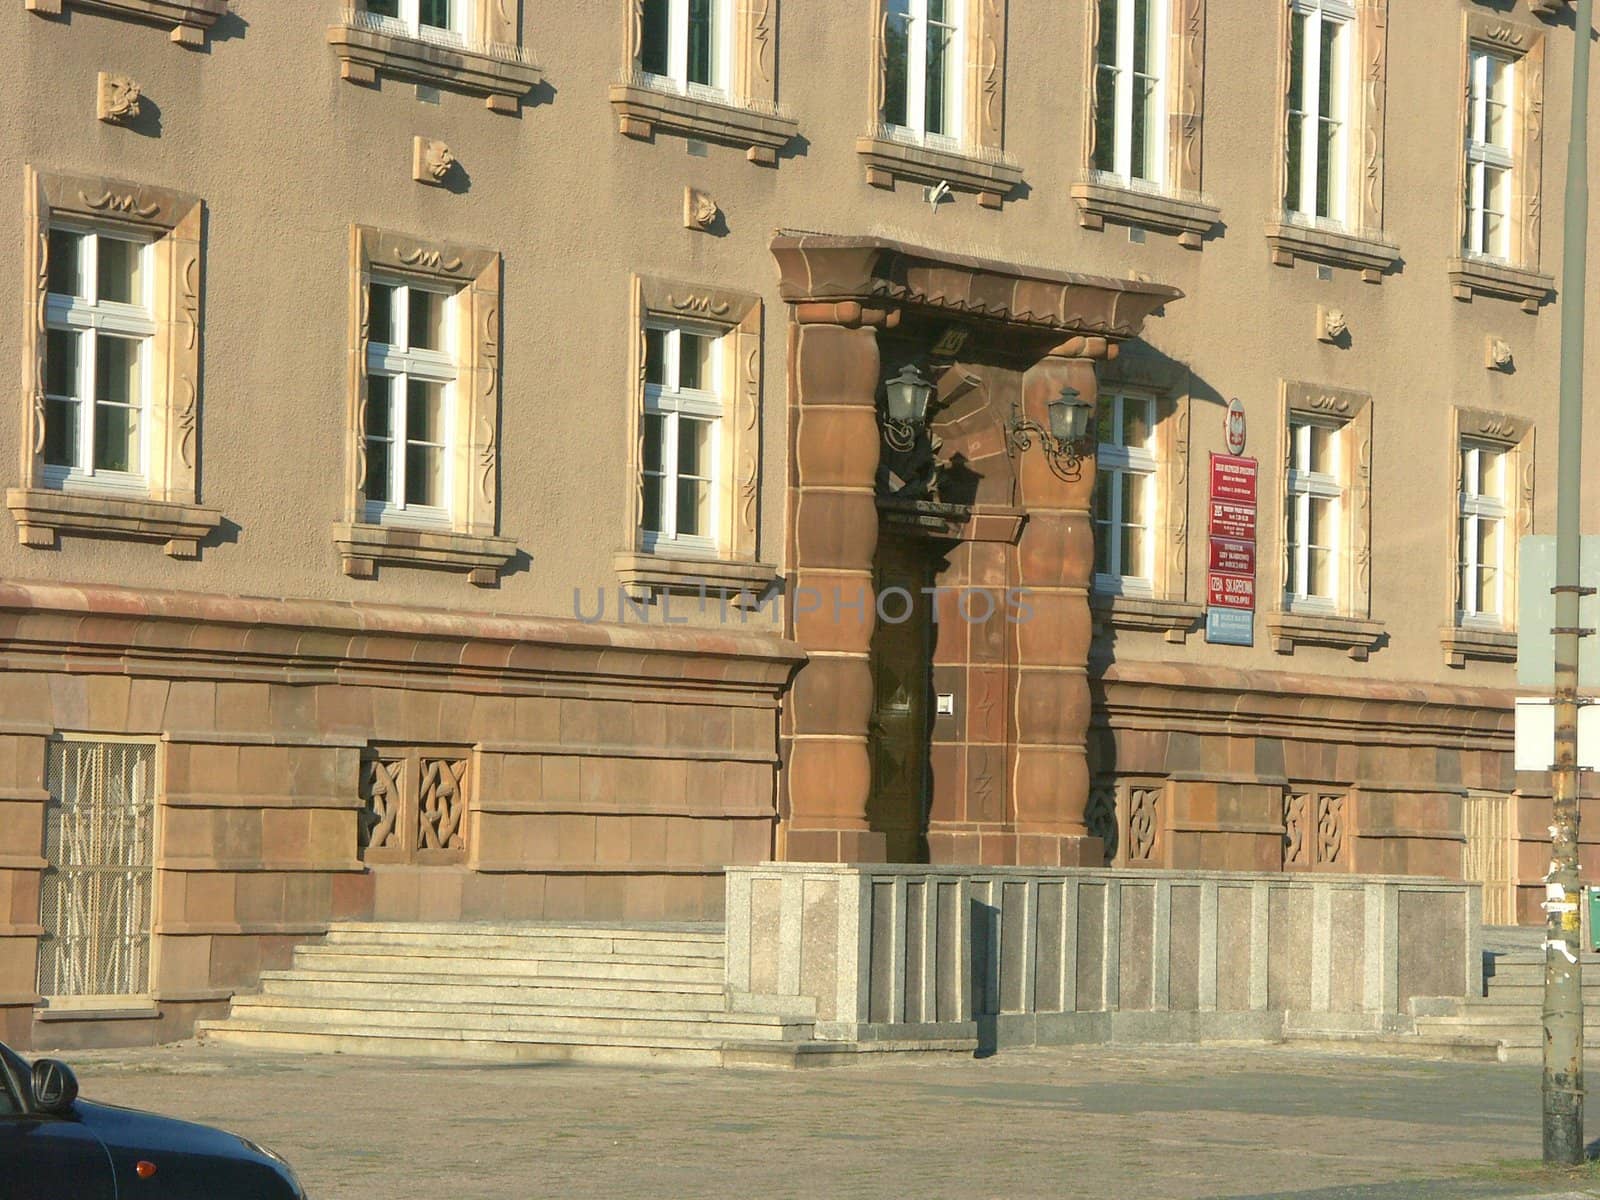 Social insurance institution in Wroclaw